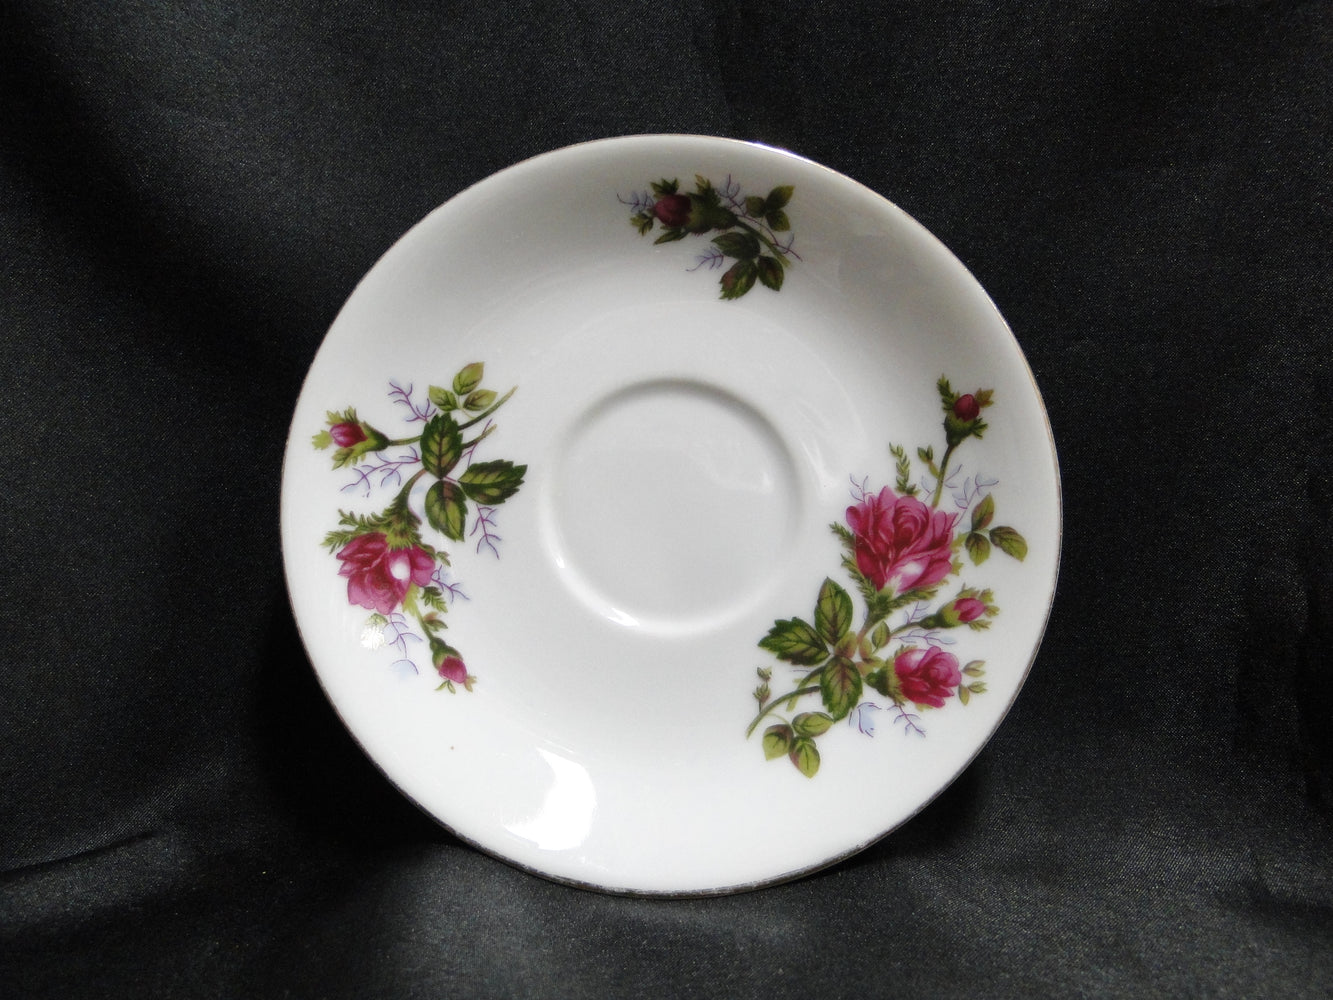 Mikasa Moss Rose 7288, Gold Trim: 6" Saucer (s) Only, No Cup